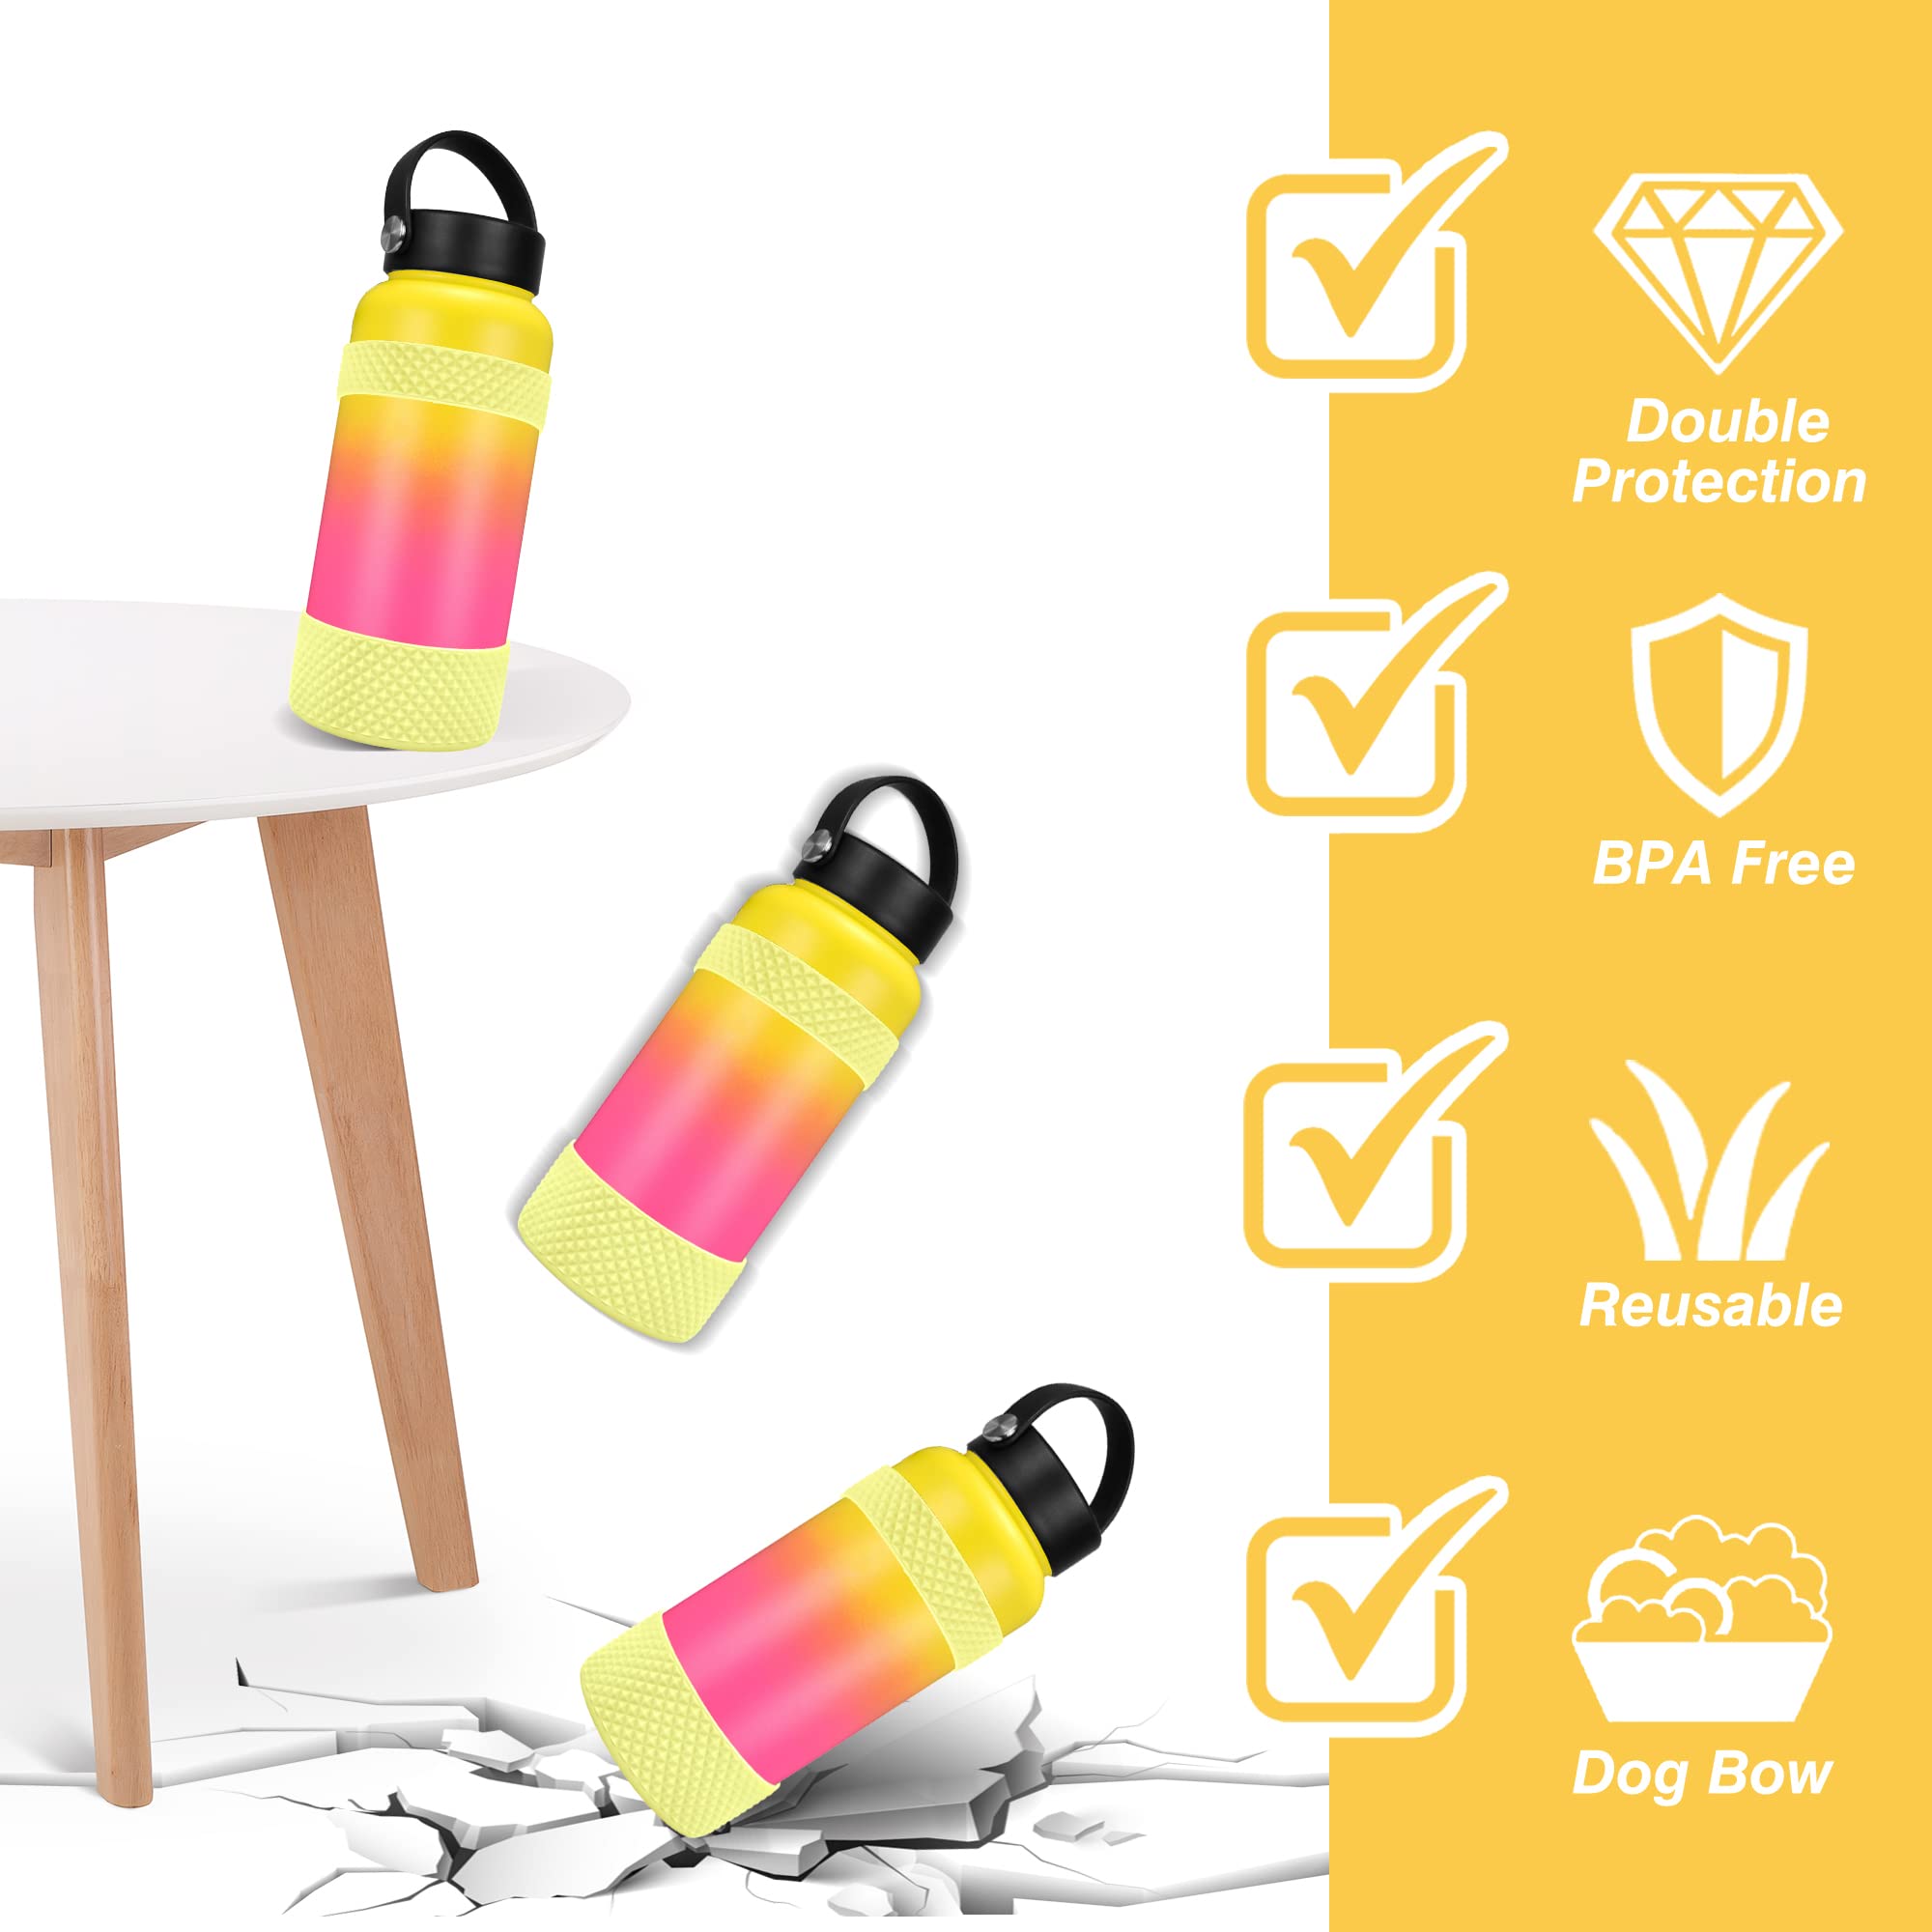 DGQ 4 Pieces Water Bottle Silivone Sleeve Bottle Bottom Base Protective  Cover Glass Spray Bottle Protective Silione Boot Washable Rubber Bottom  Base